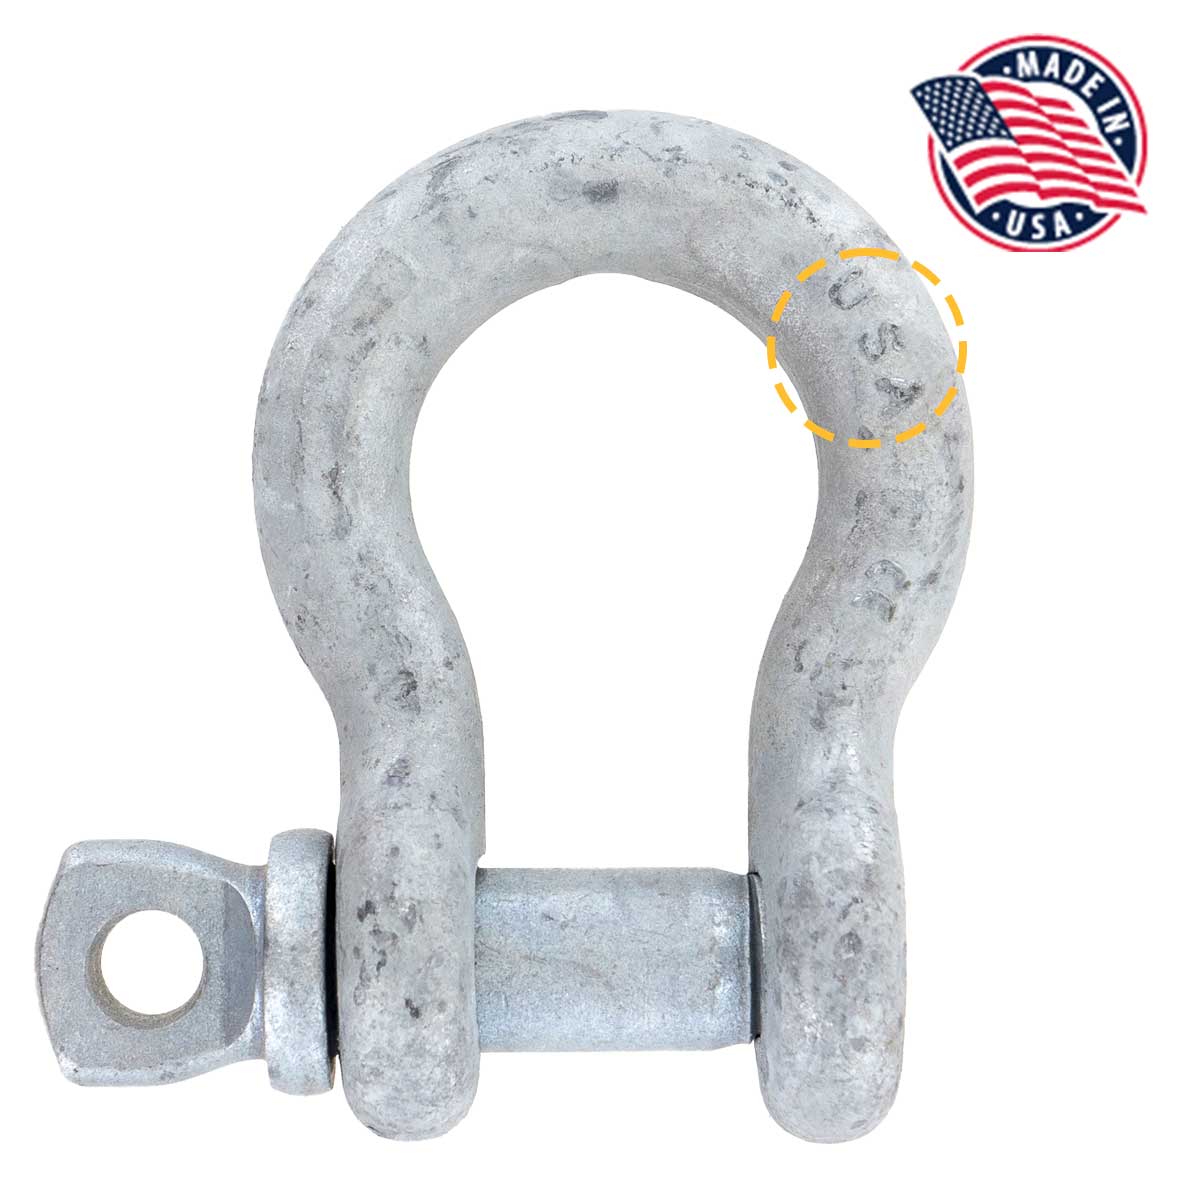 3/4" Crosby® Alloy Screw Pin Anchor Shackle | G-209A - 7 Ton made in USA